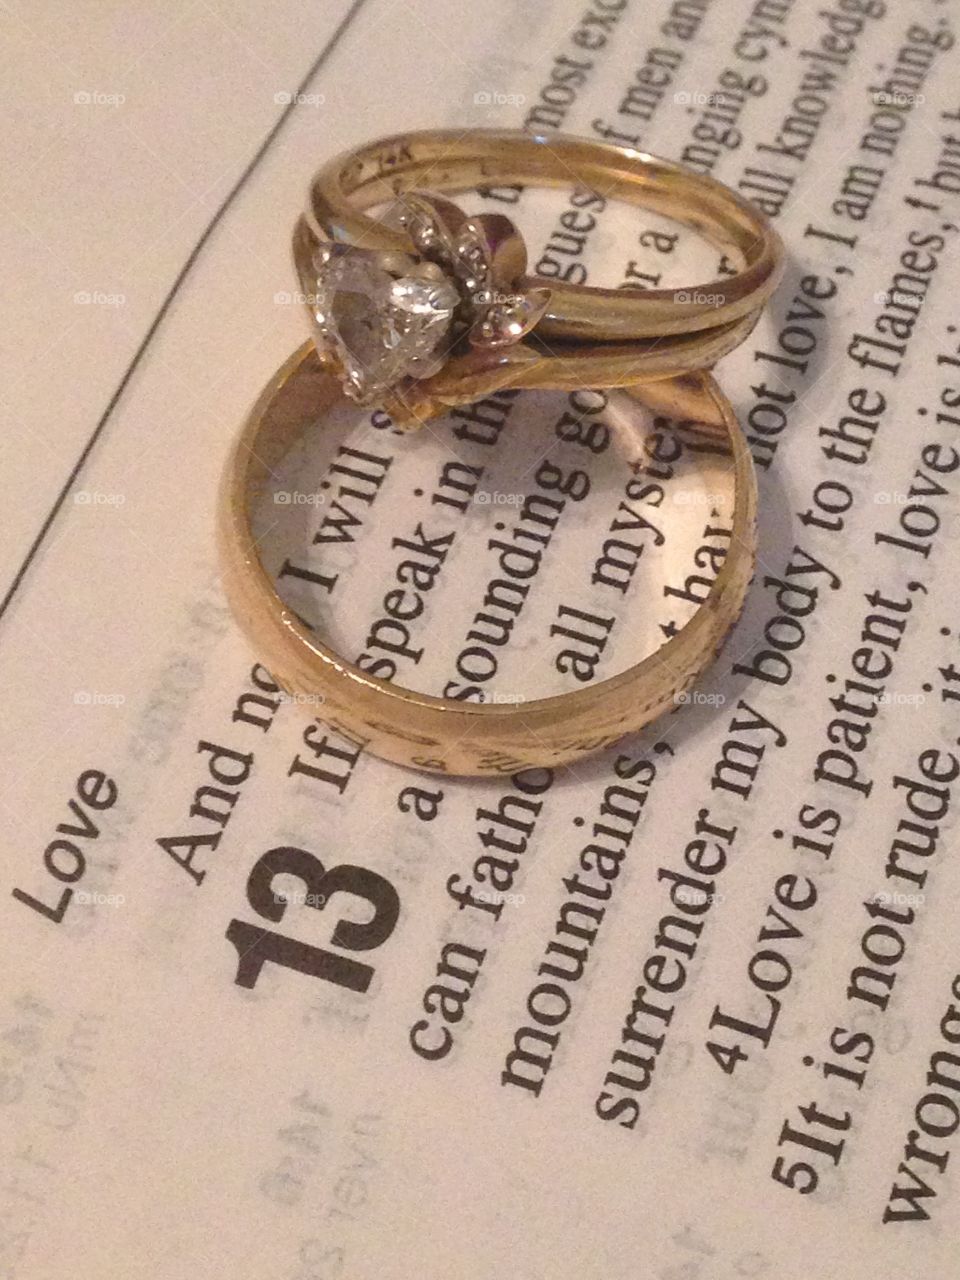 The greatest of these is love. Wedding rings on 1 Corinthians 13 in Bible